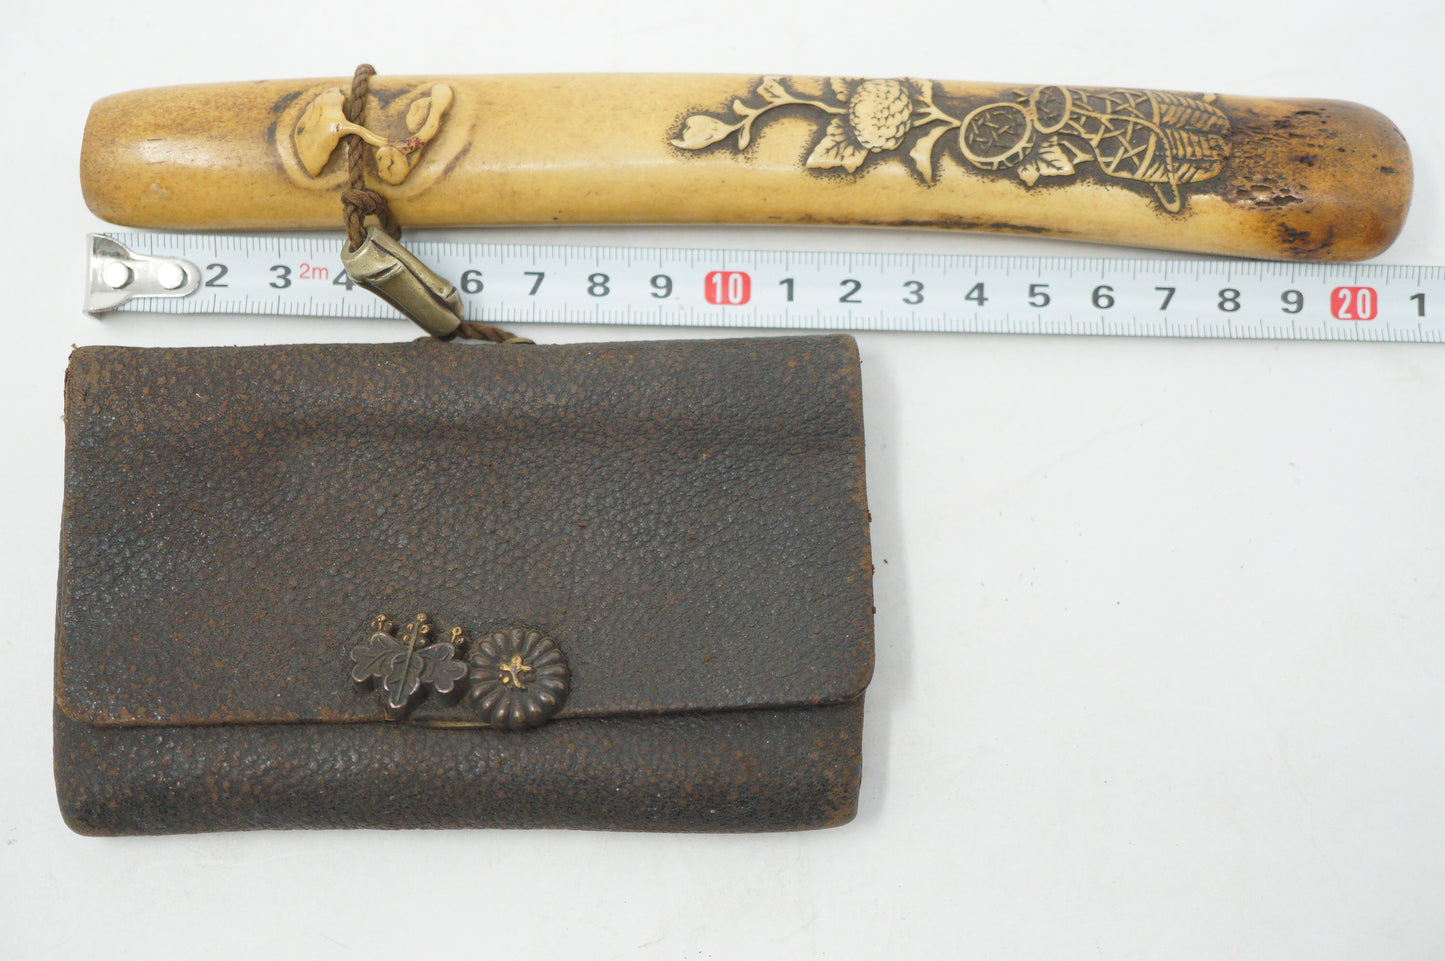 Antique Tobacco-Ire Set with Leather Pouch & Well-Crafted Pipe Container from Japan 1129D12